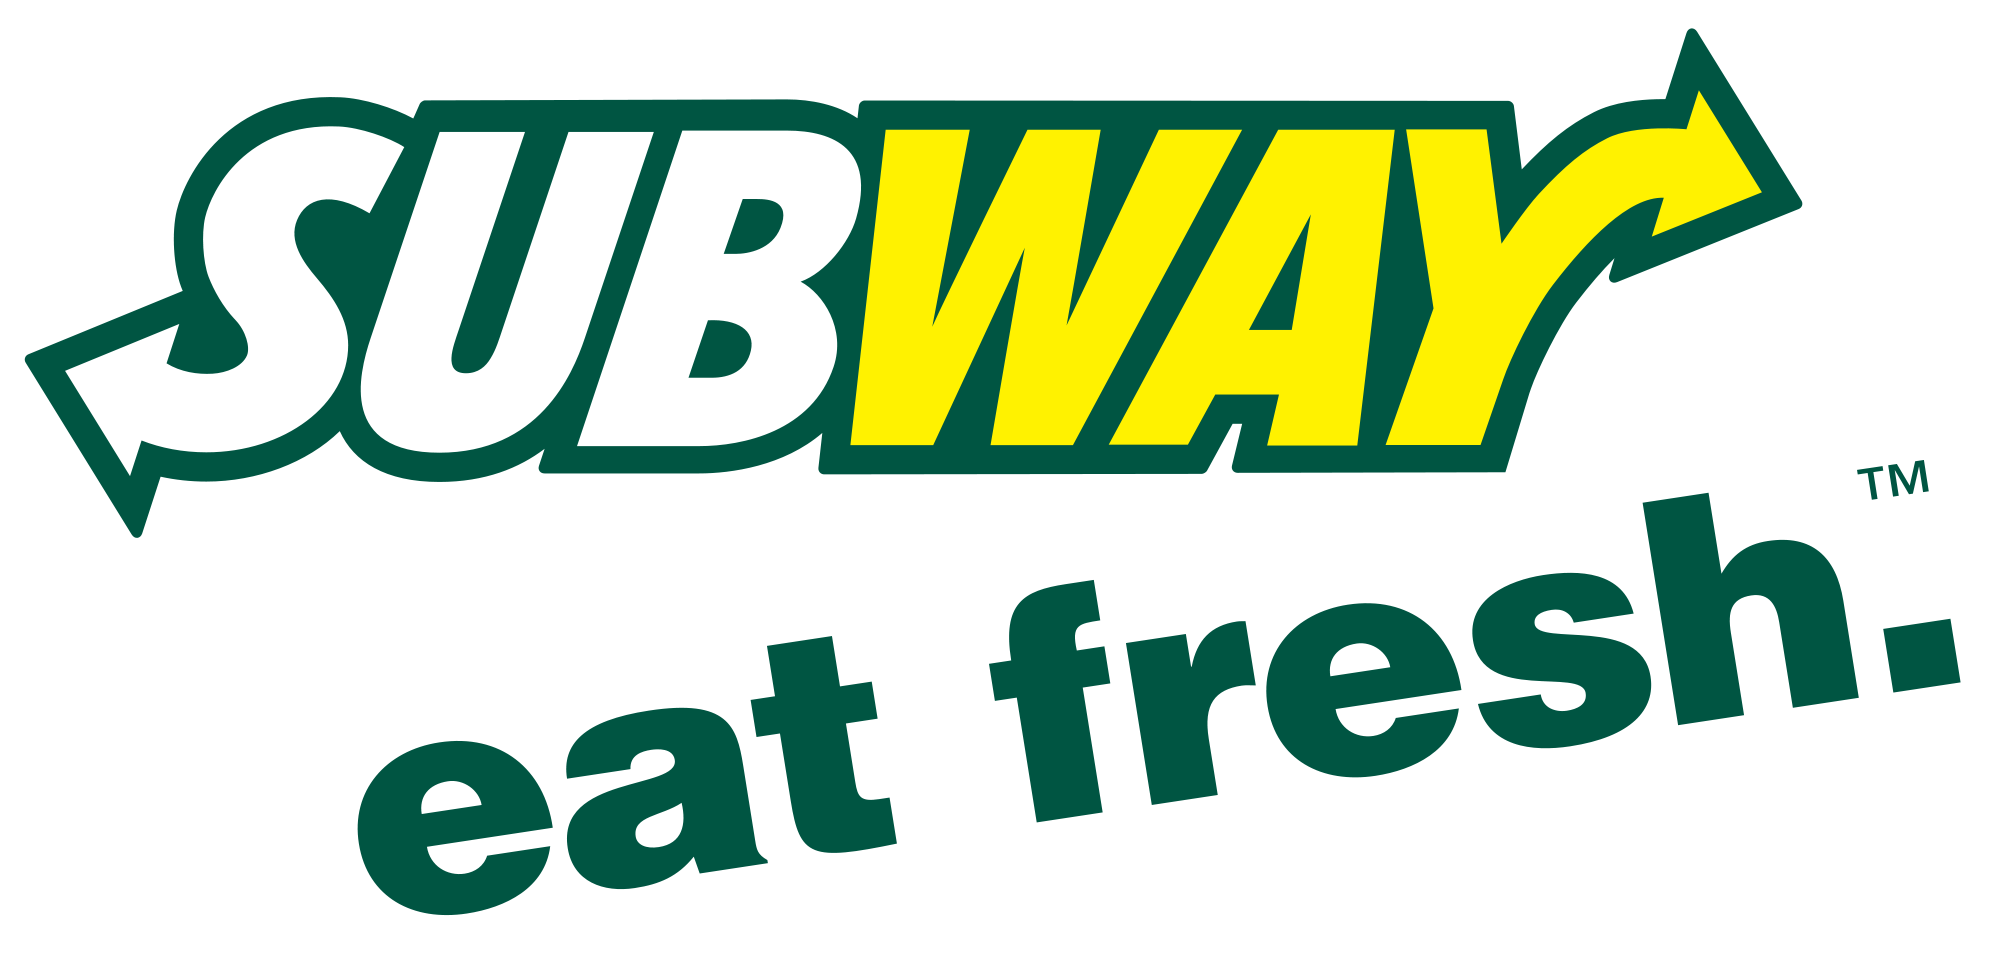 Subway: Buy One Sub and Drink, Get a Sub FREE Today!